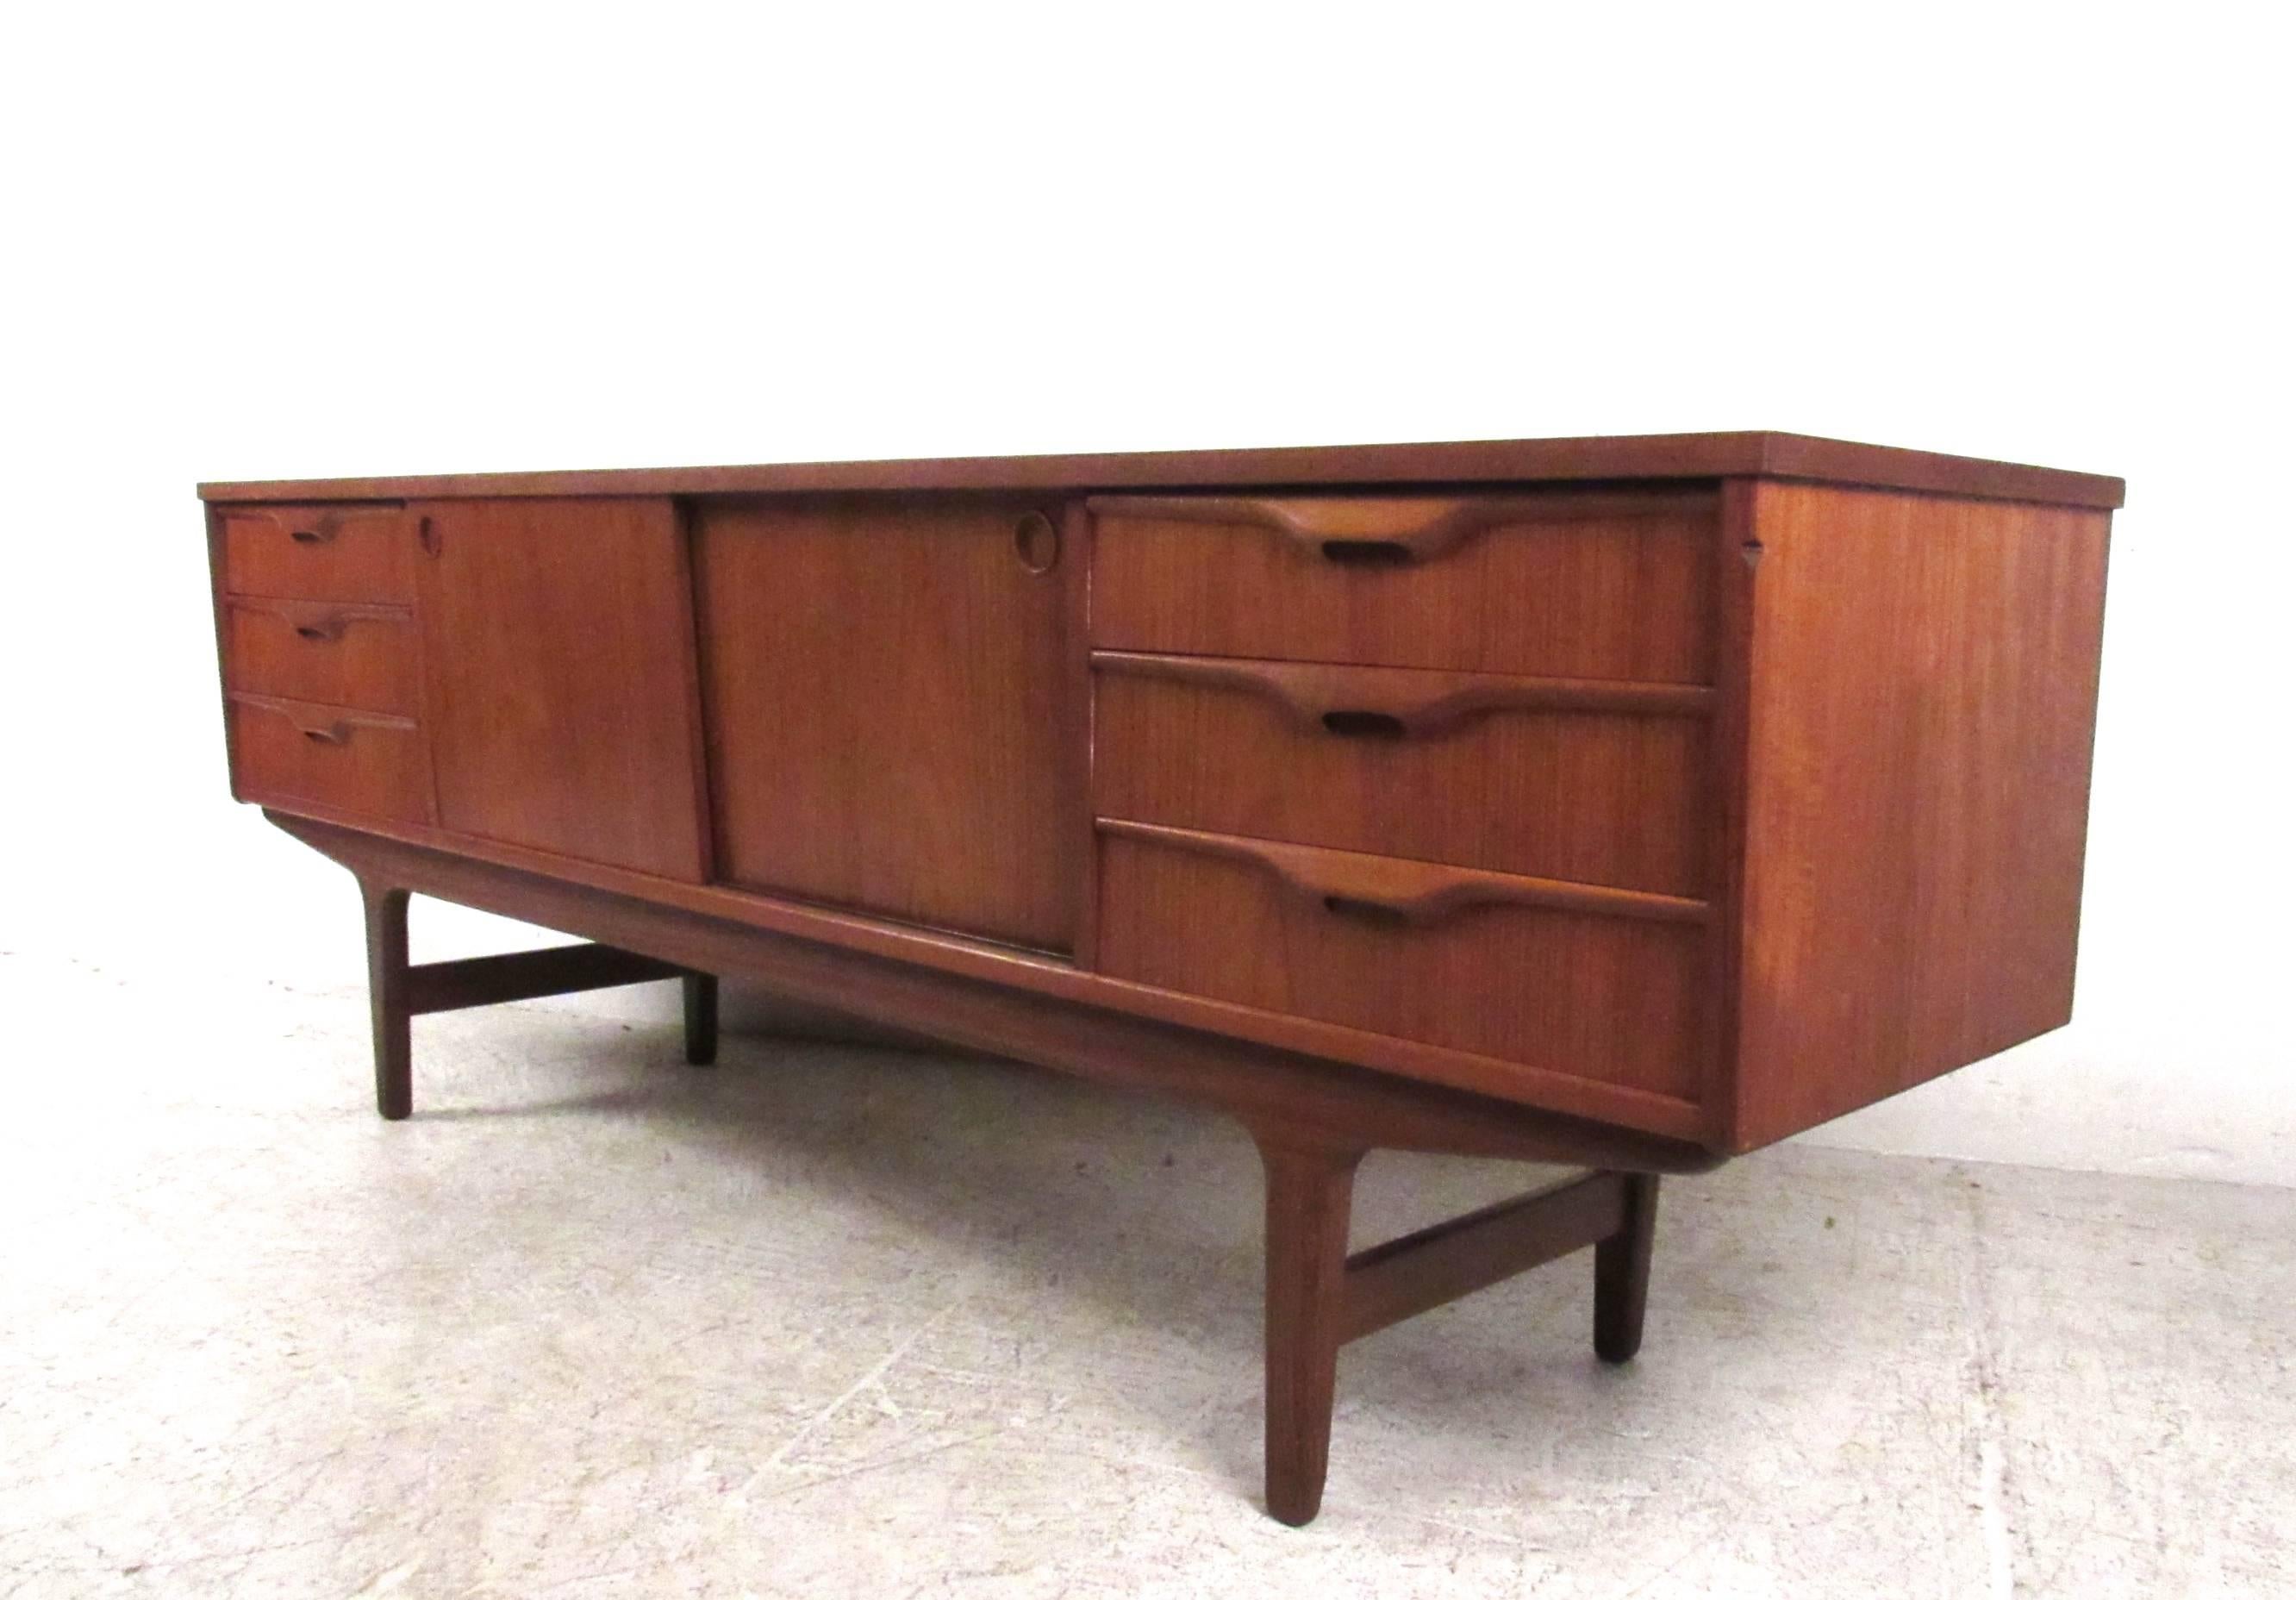 This uniquely sized vintage sideboard features a combination of six storage drawers and sliding cabinet doors. Quality Scandinavian Modern construction, carved handles, and its petite size add to the charm of the piece. Ideal storage credenza for